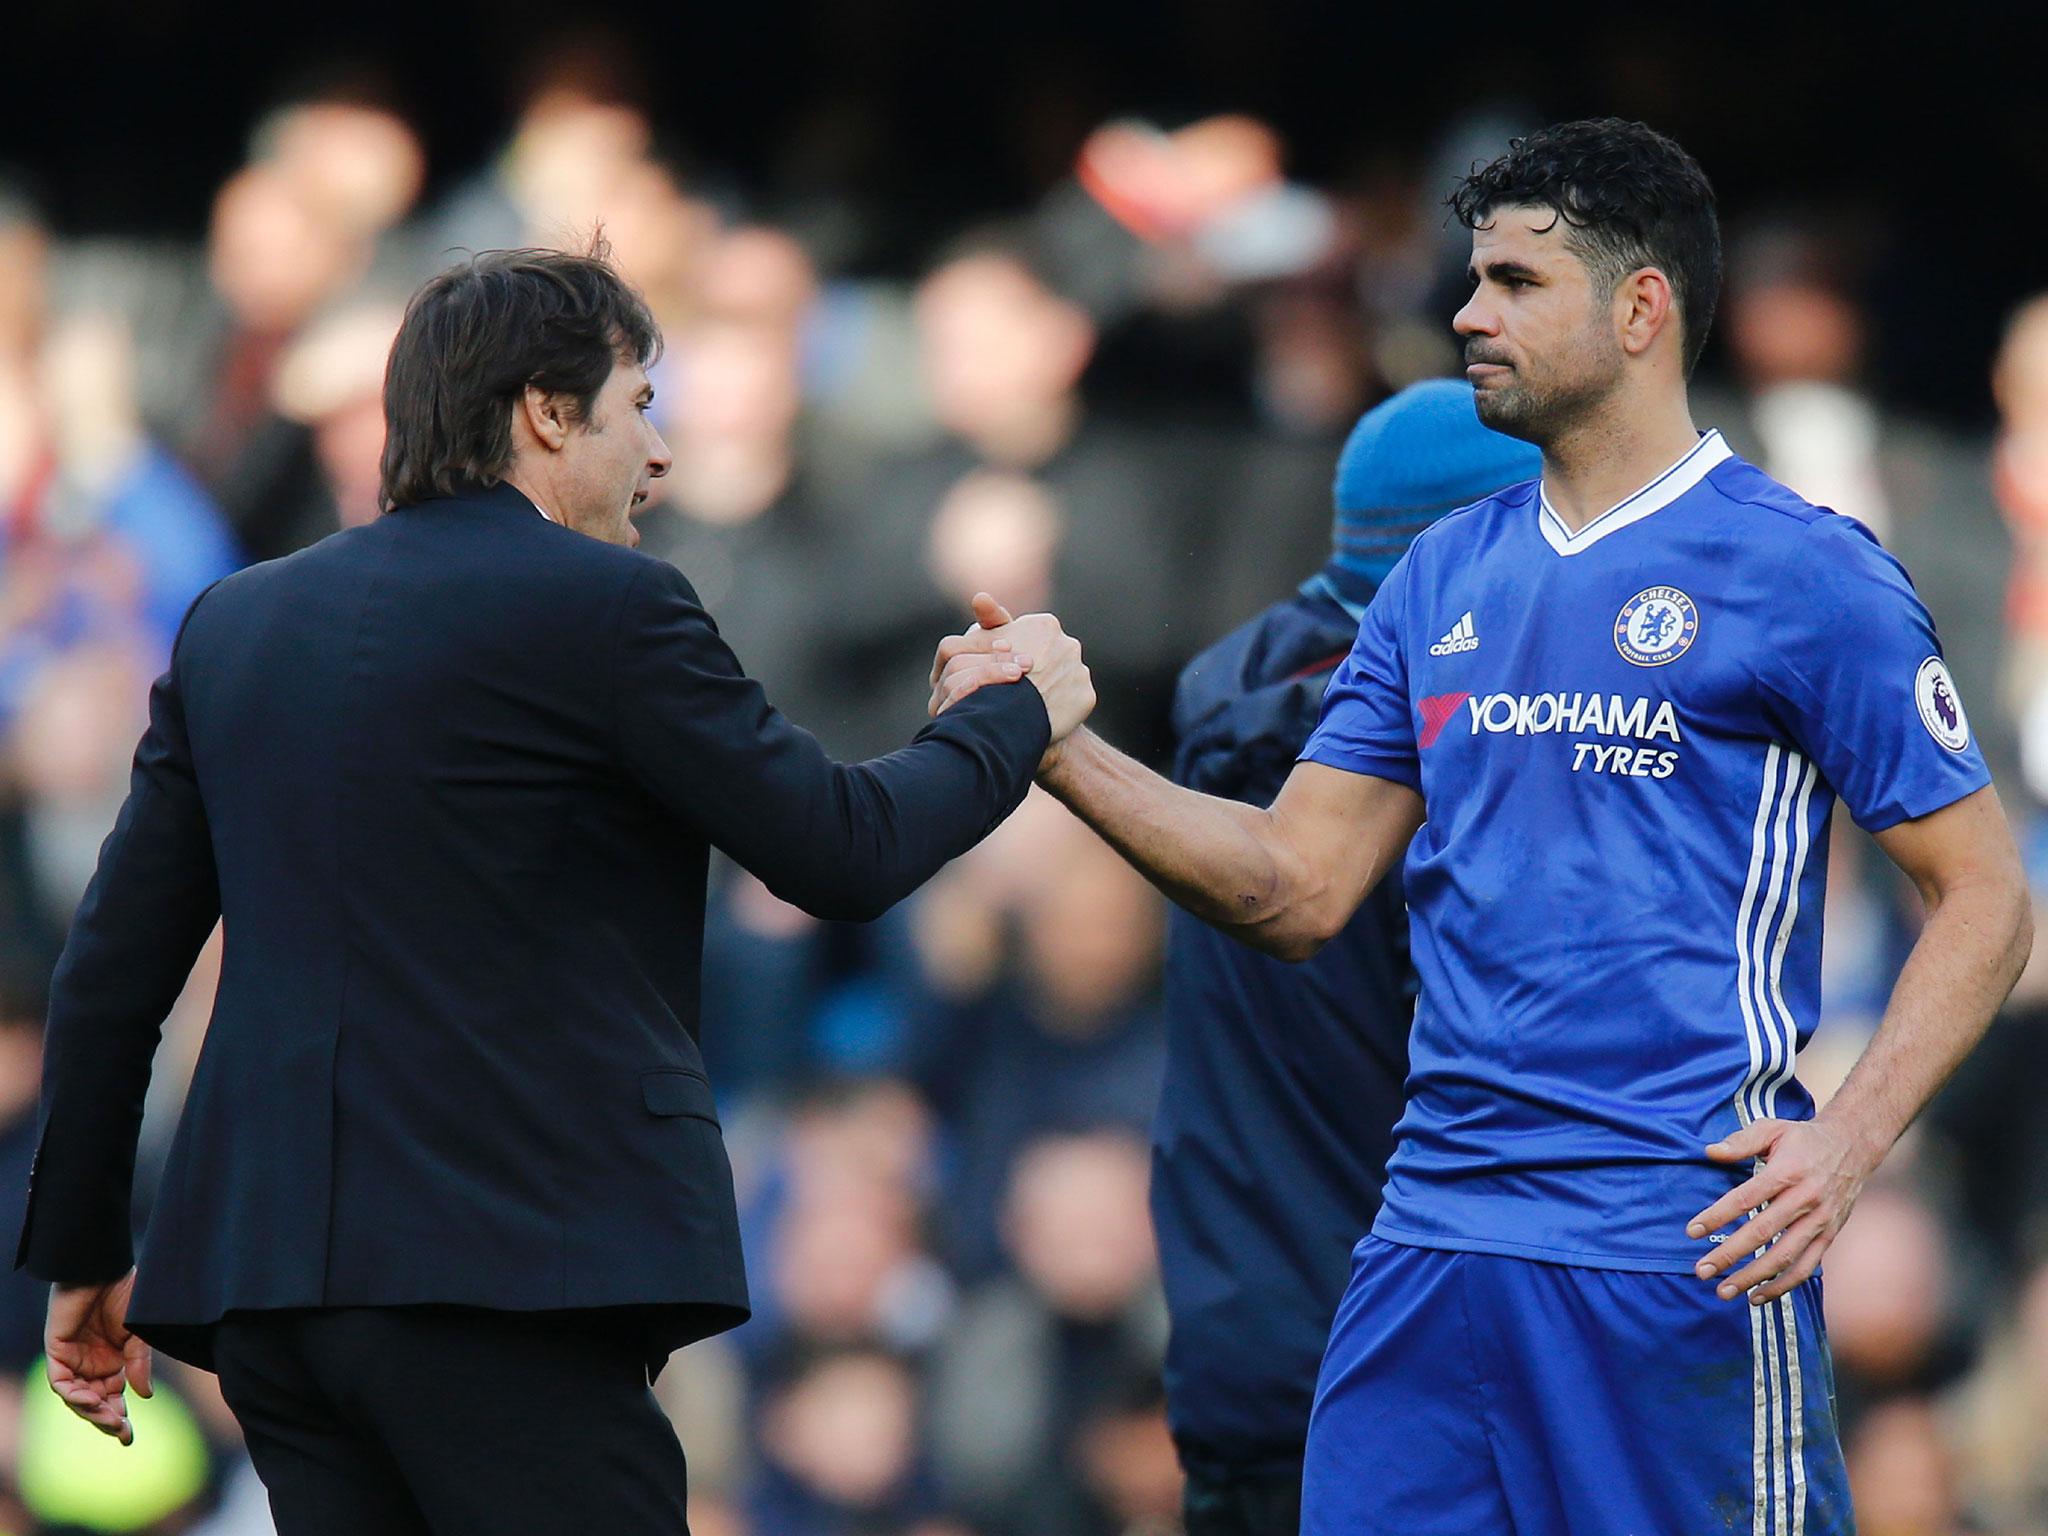 Diego Costa had to go back to Antonio Conte 'with my tail between my legs' after trying to leave Chelsea